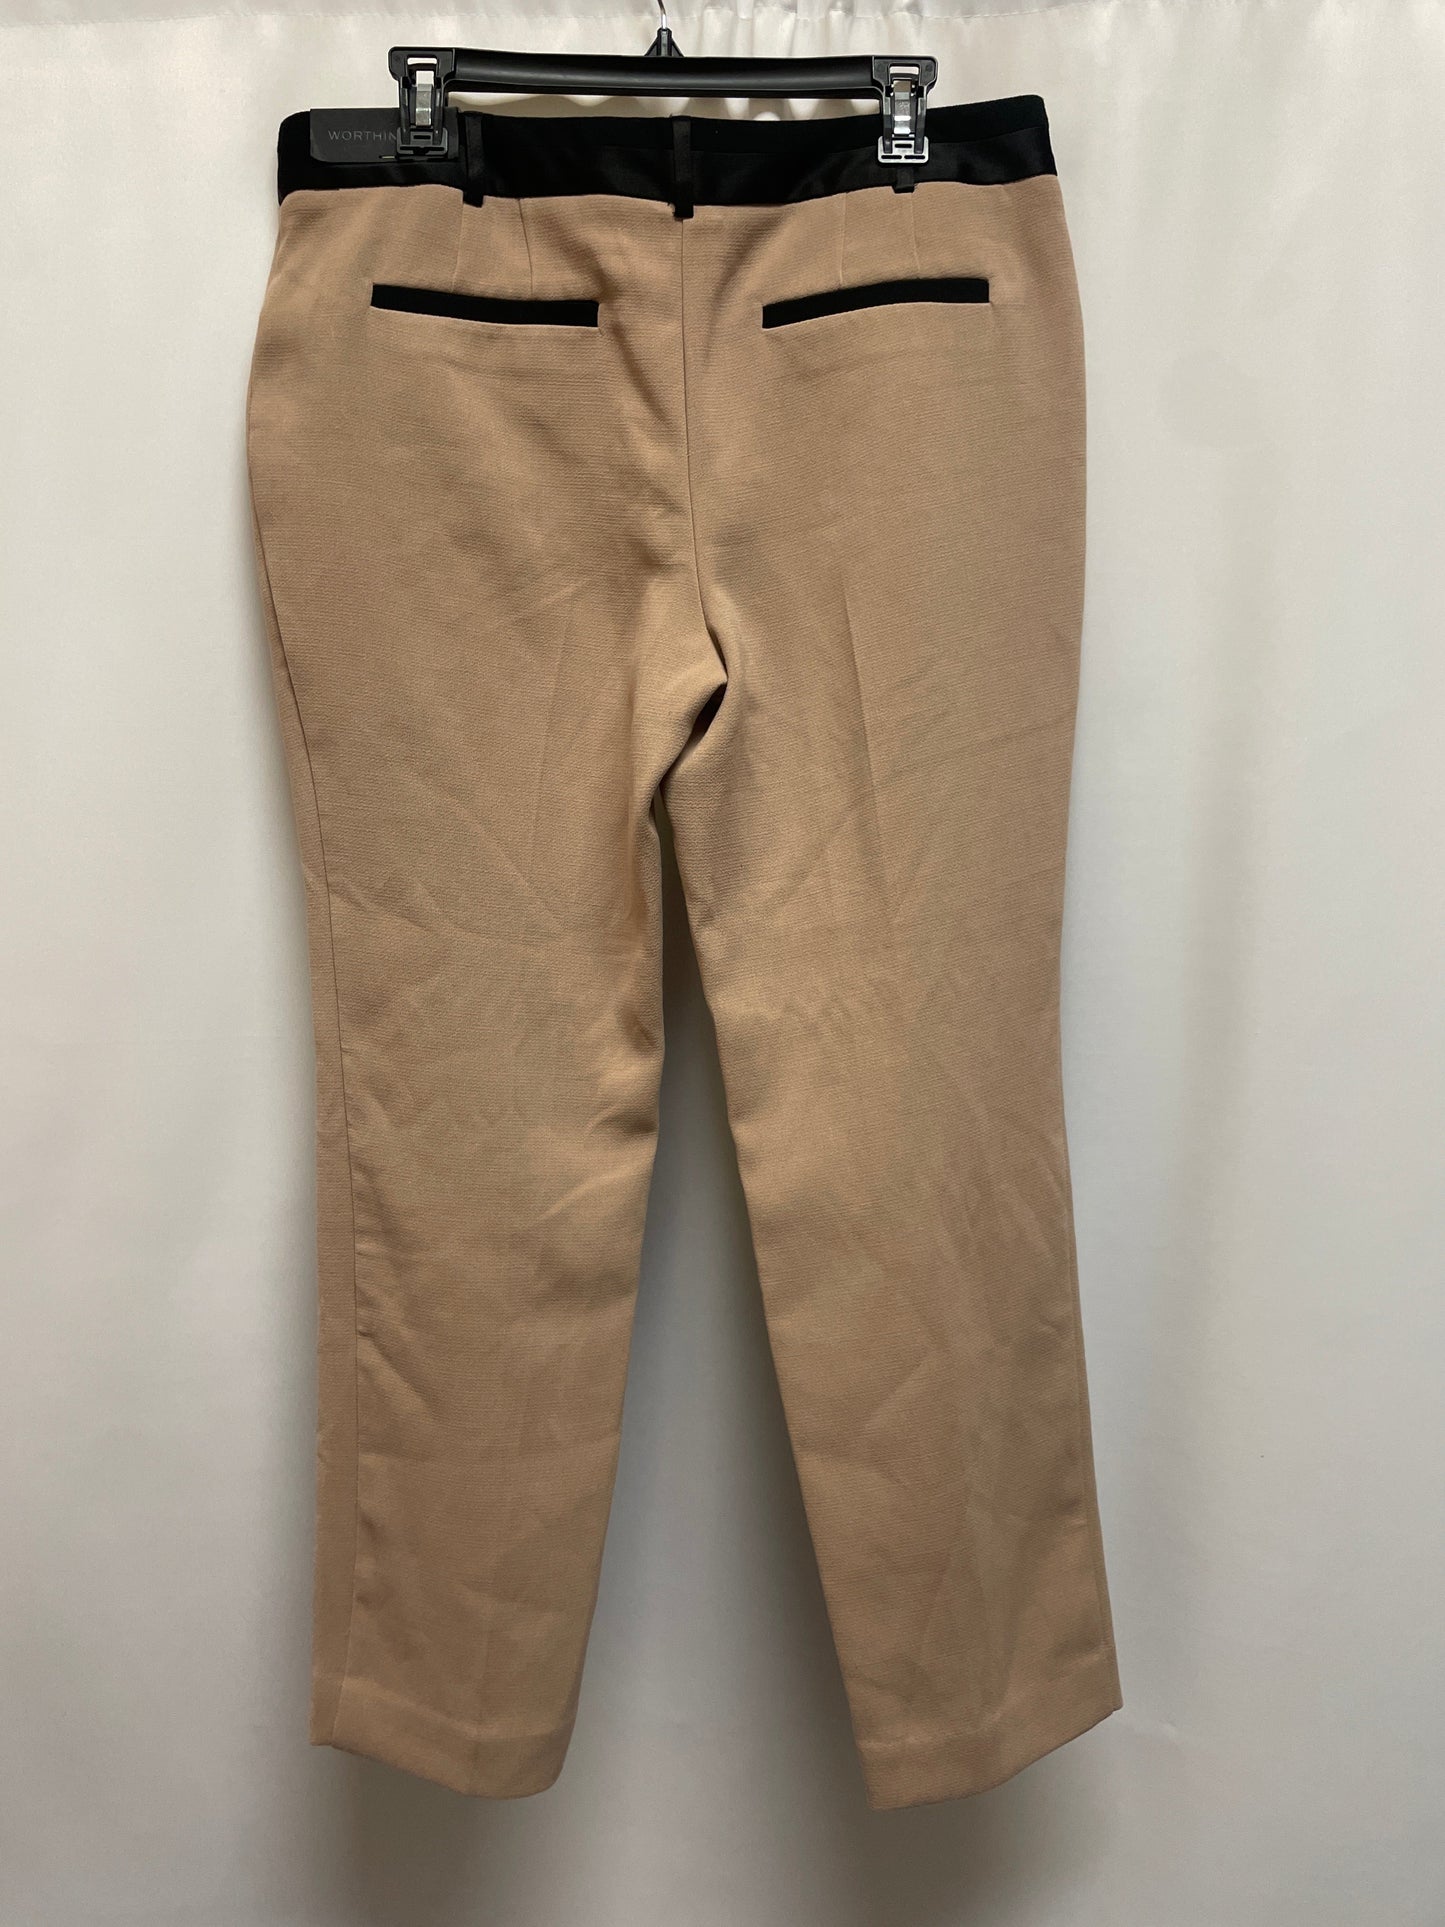 Pants Ankle By Worthington  Size: 14